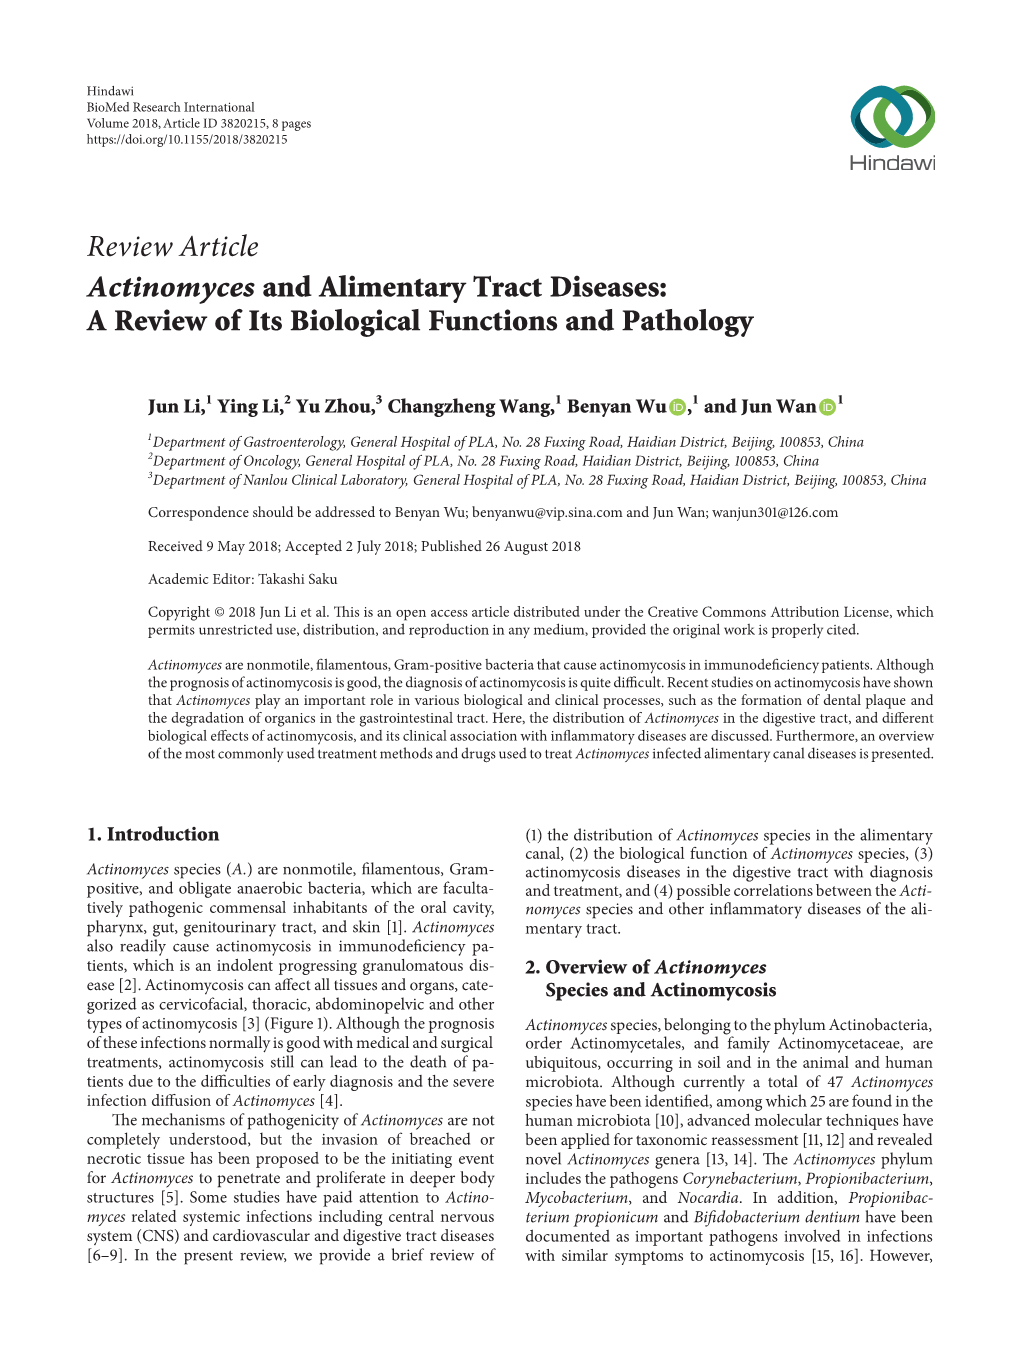 Actinomyces and Alimentary Tract Diseases: a Review of Its Biological Functions and Pathology